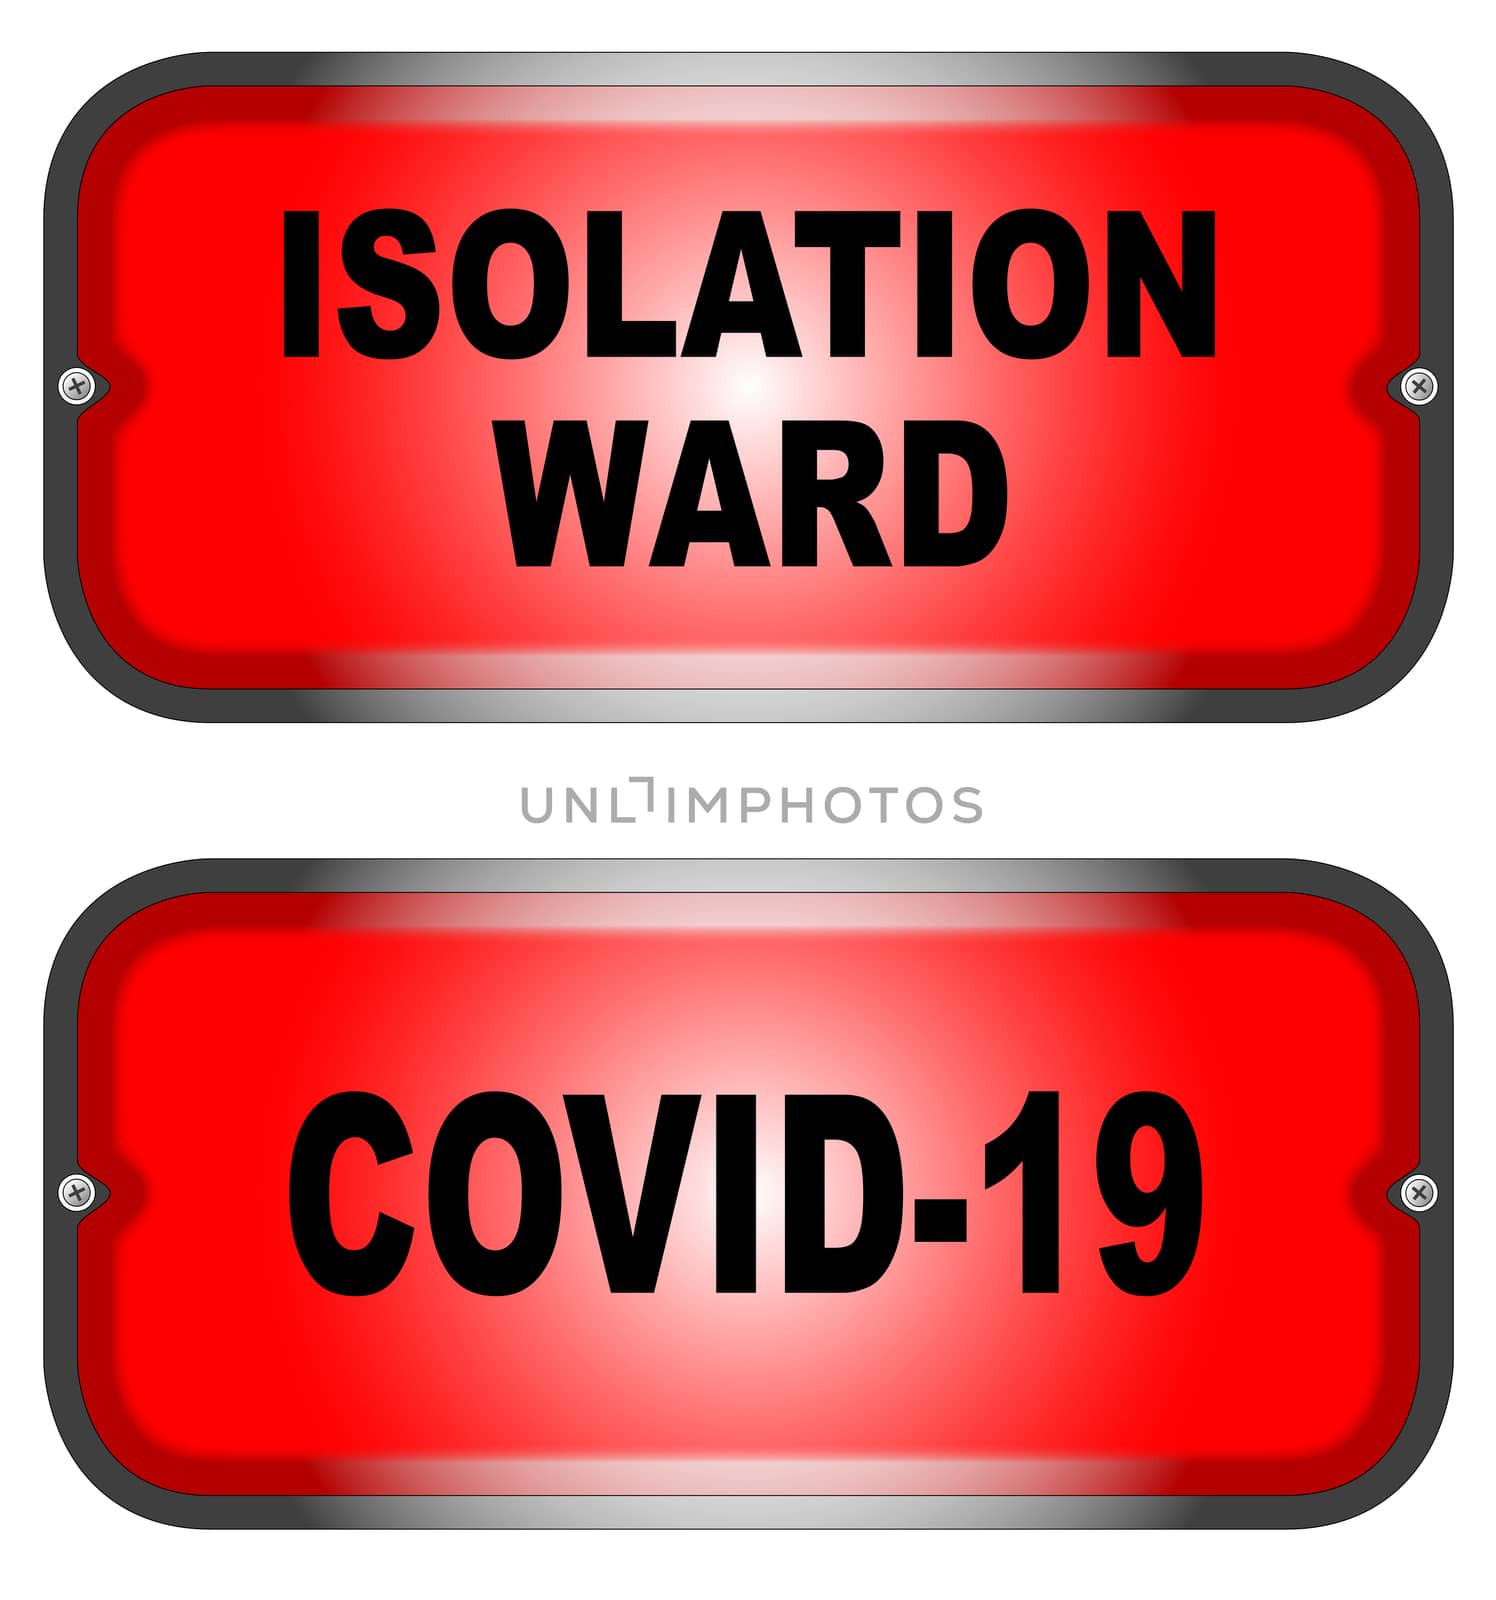 Two warning lights, one for a Covid-19 and the other for Isolation Ward over a white background